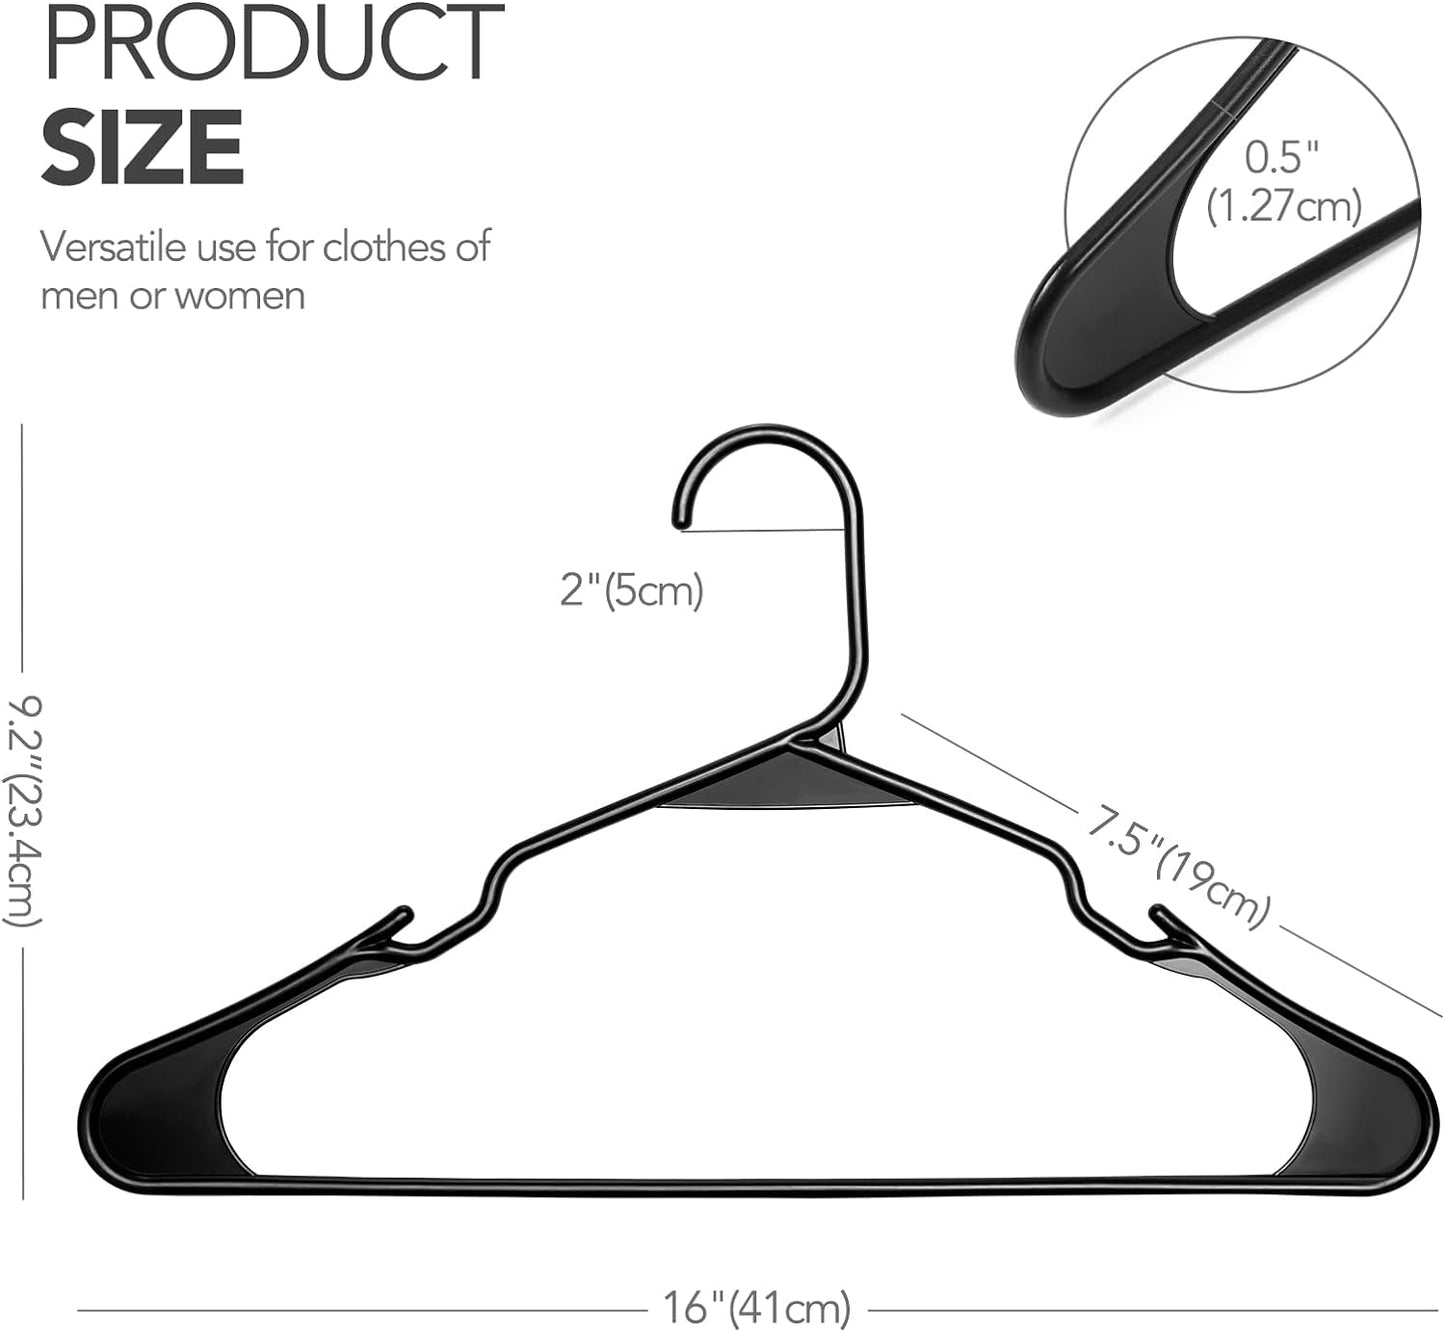 HOUSE DAY 16.5x9.3 Inch Plastic Hangers Black 50 Pack